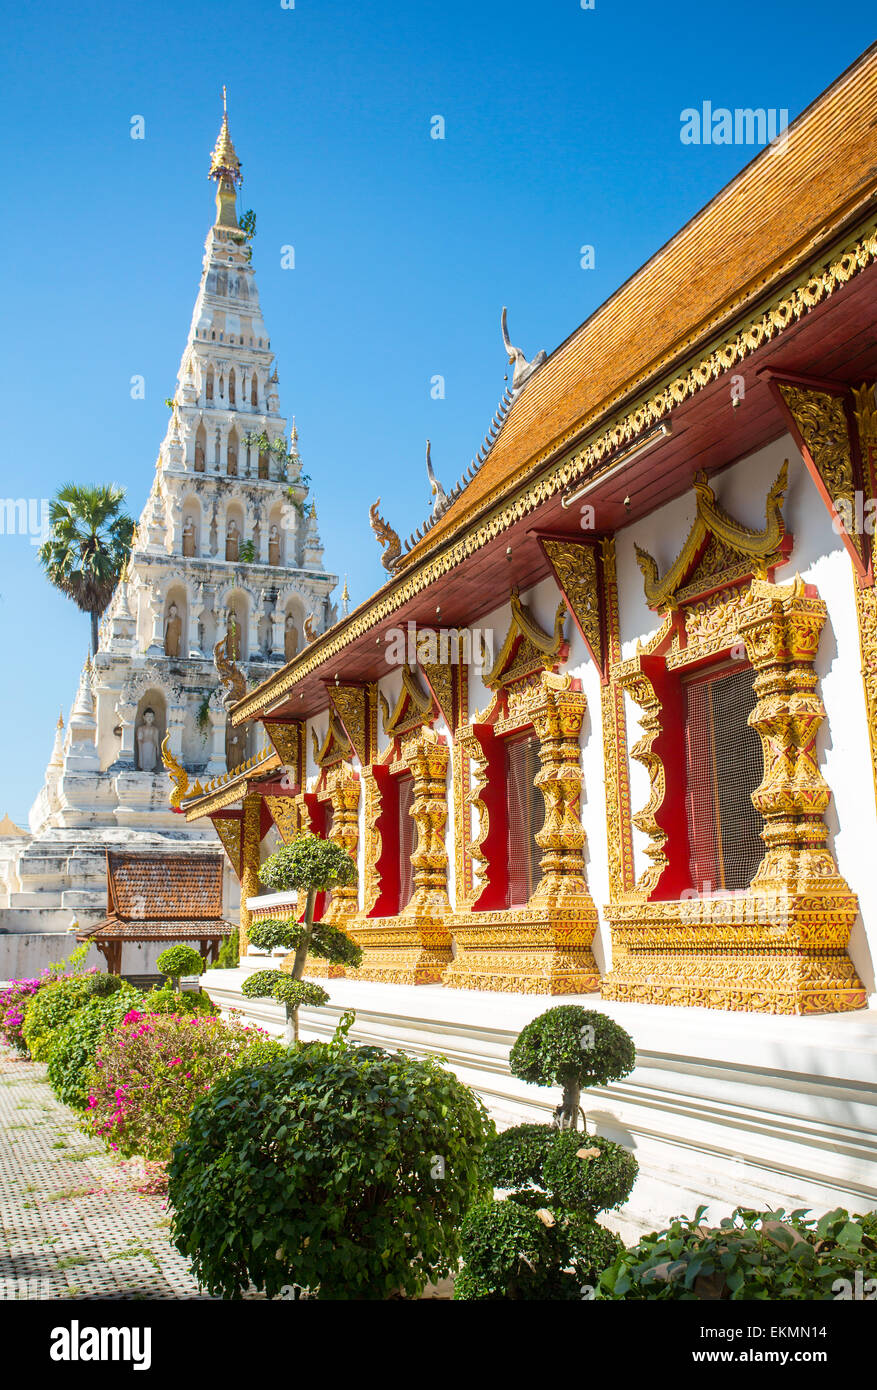 Wat Chedi Liam or Wat Ku Kham in the ancient Thai city of Wiang Kum Kam, Thailand Stock Photo